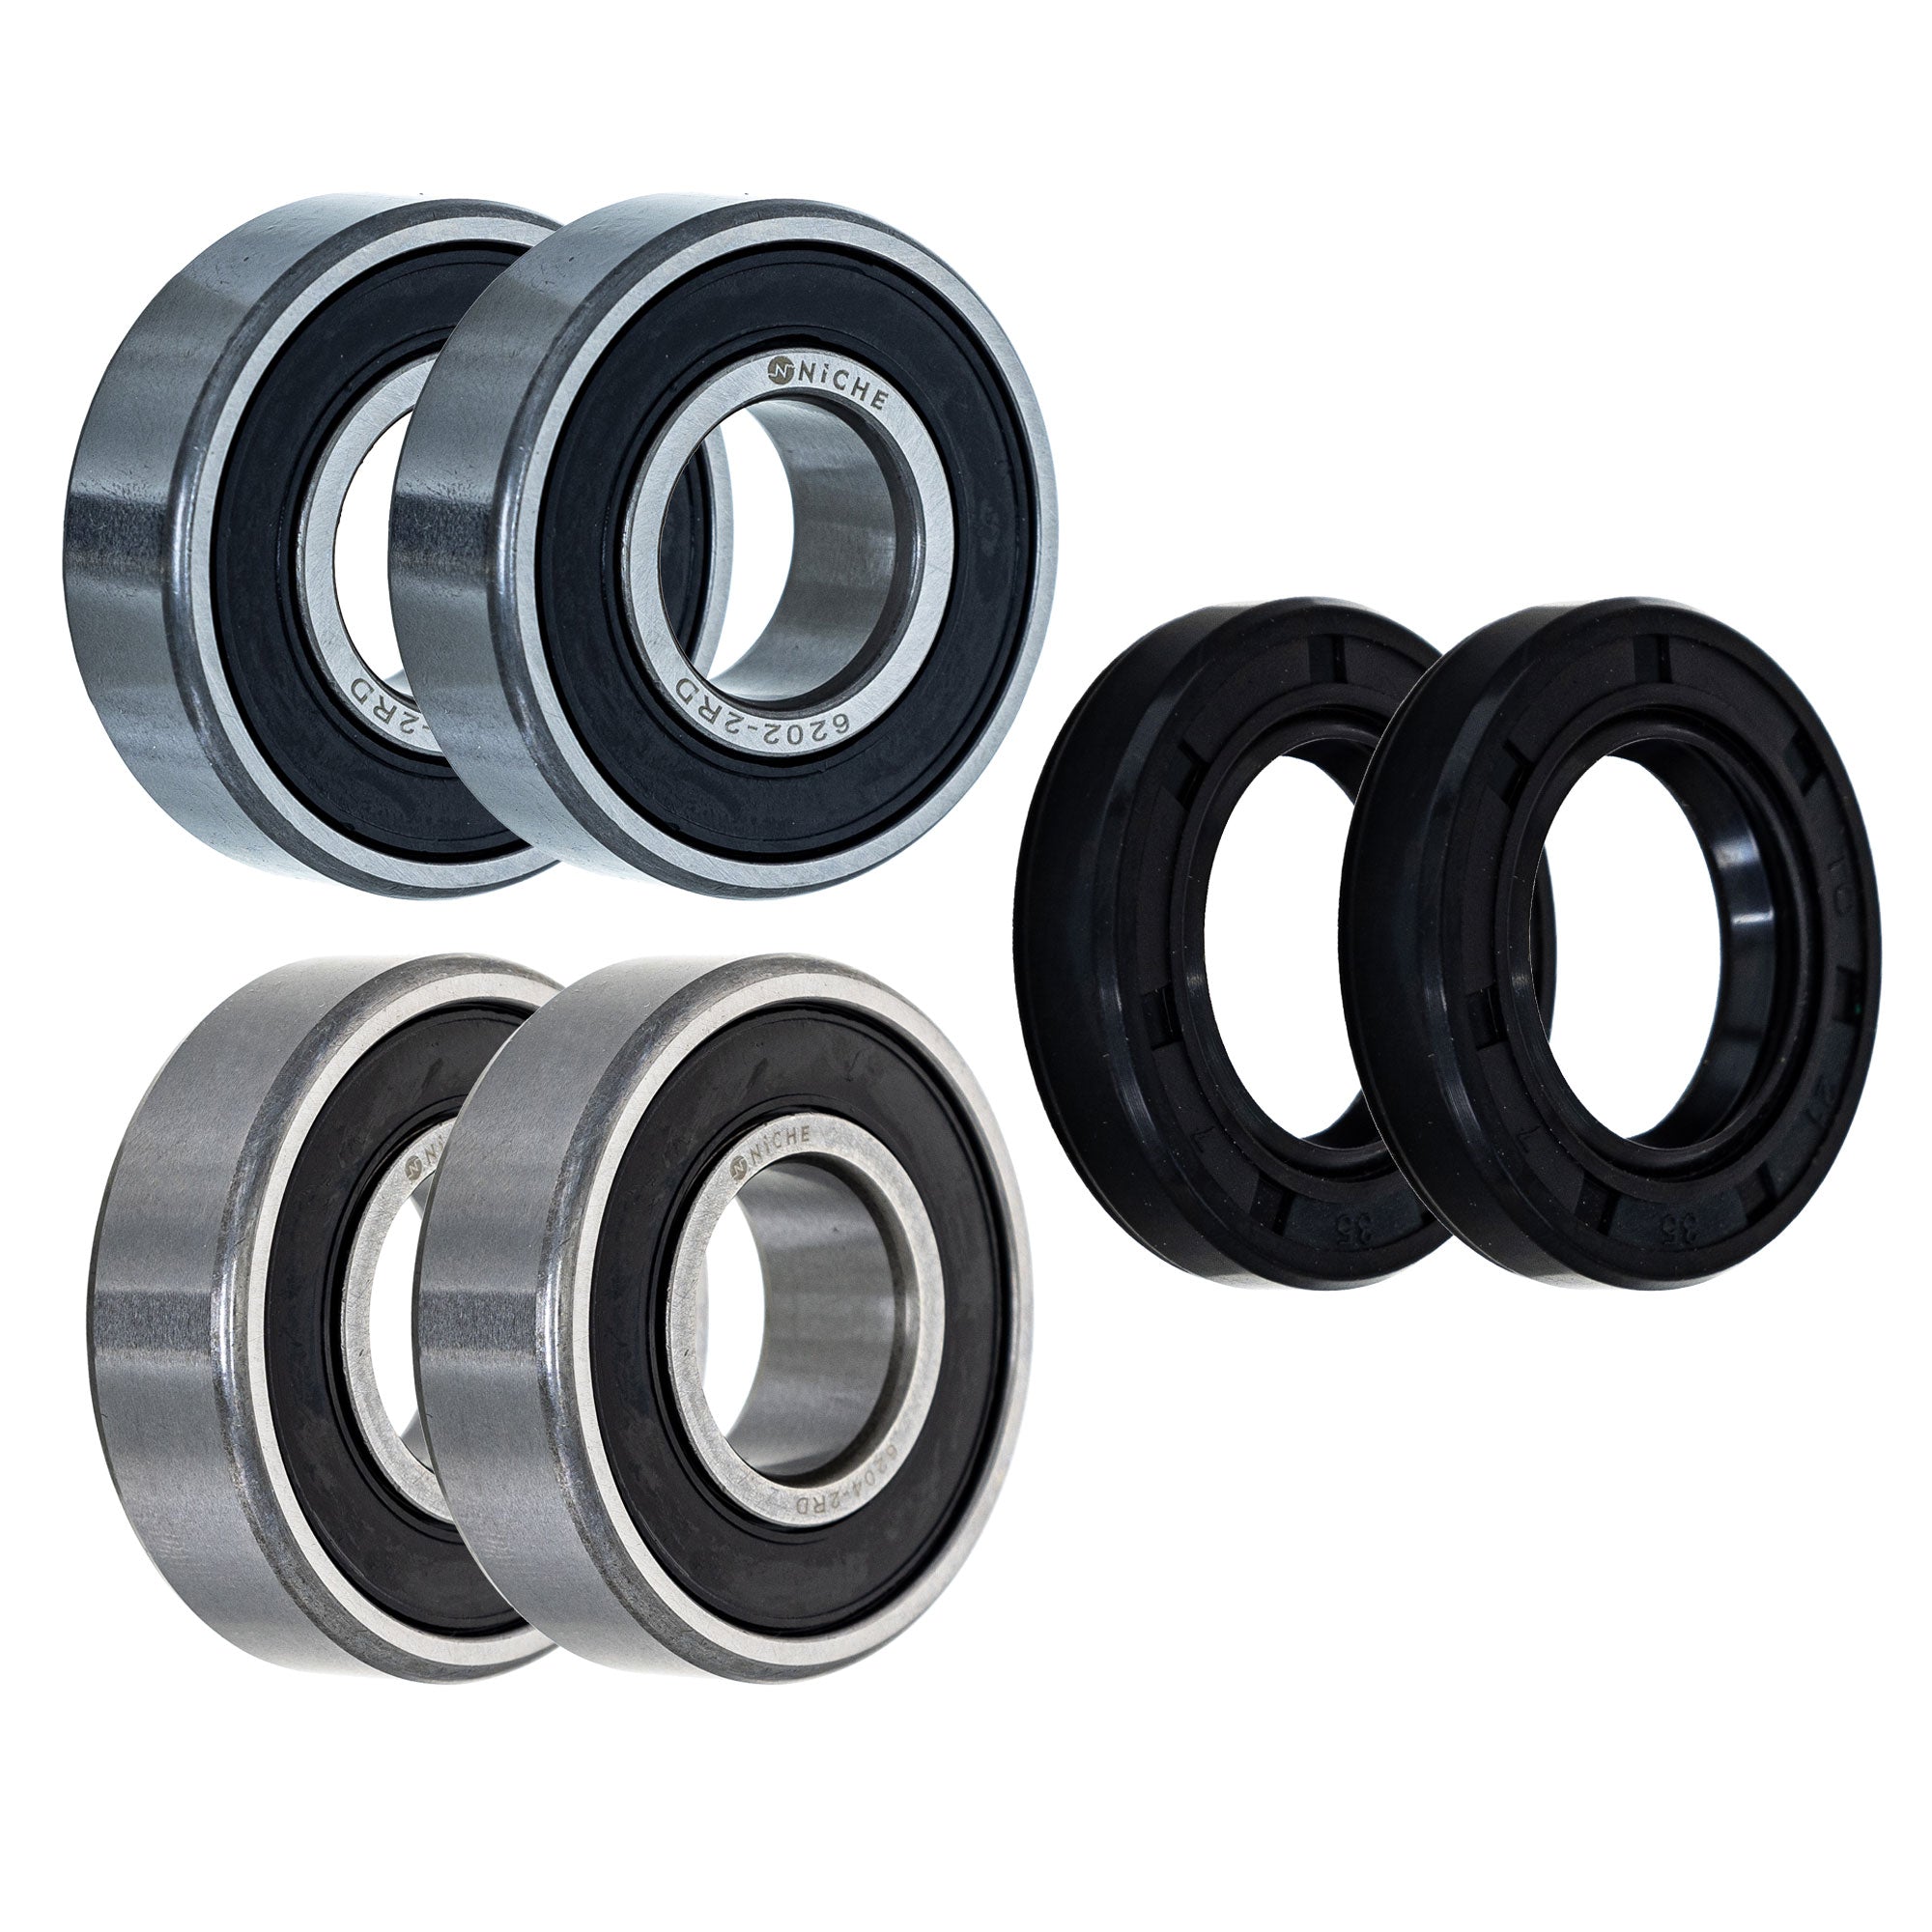 Wheel Bearing Seal Kit for zOTHER Ranger Outlaw ACE NICHE MK1009279